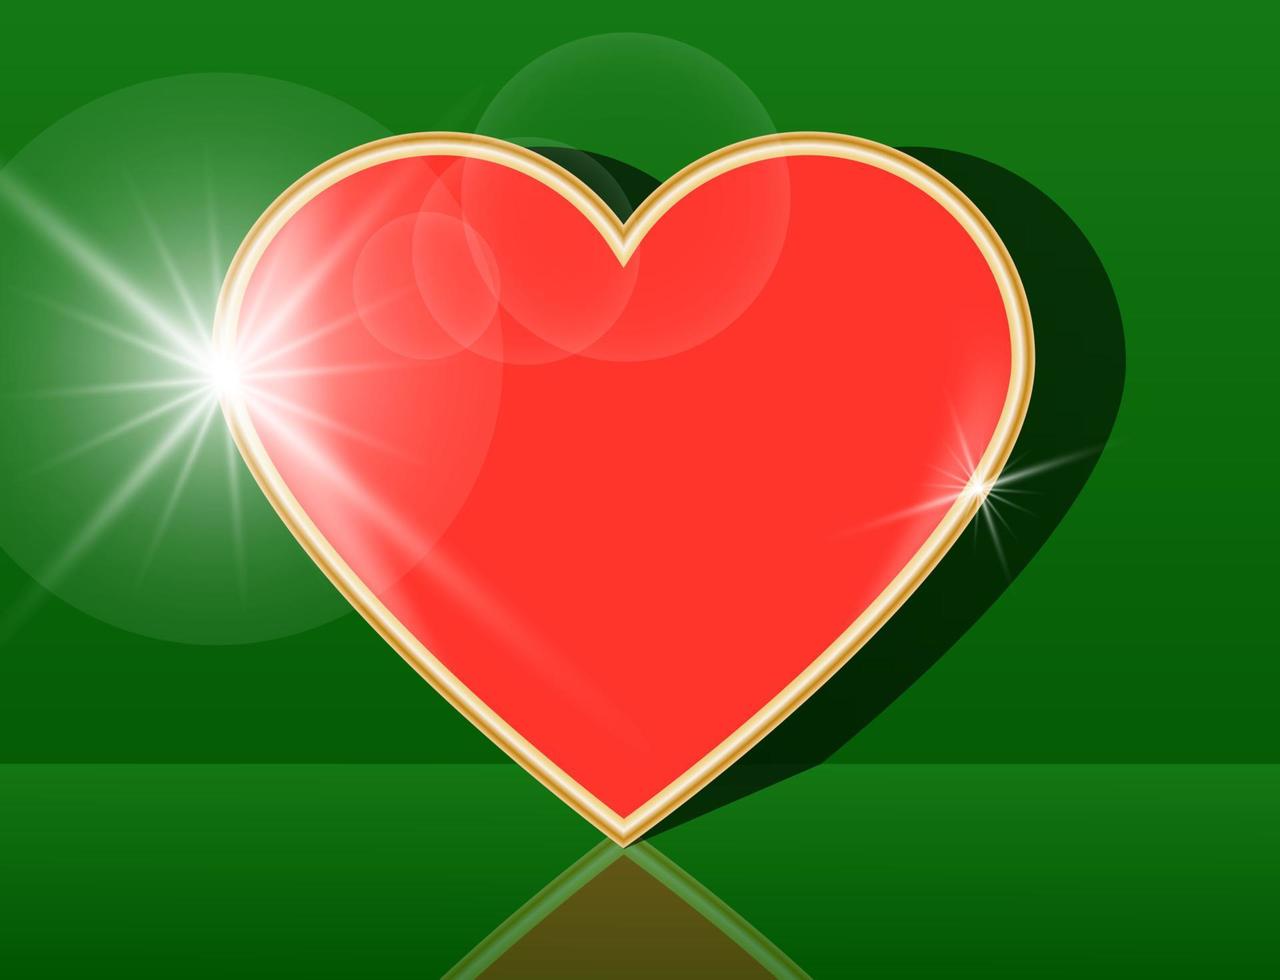 Card suit sign of hearts vector